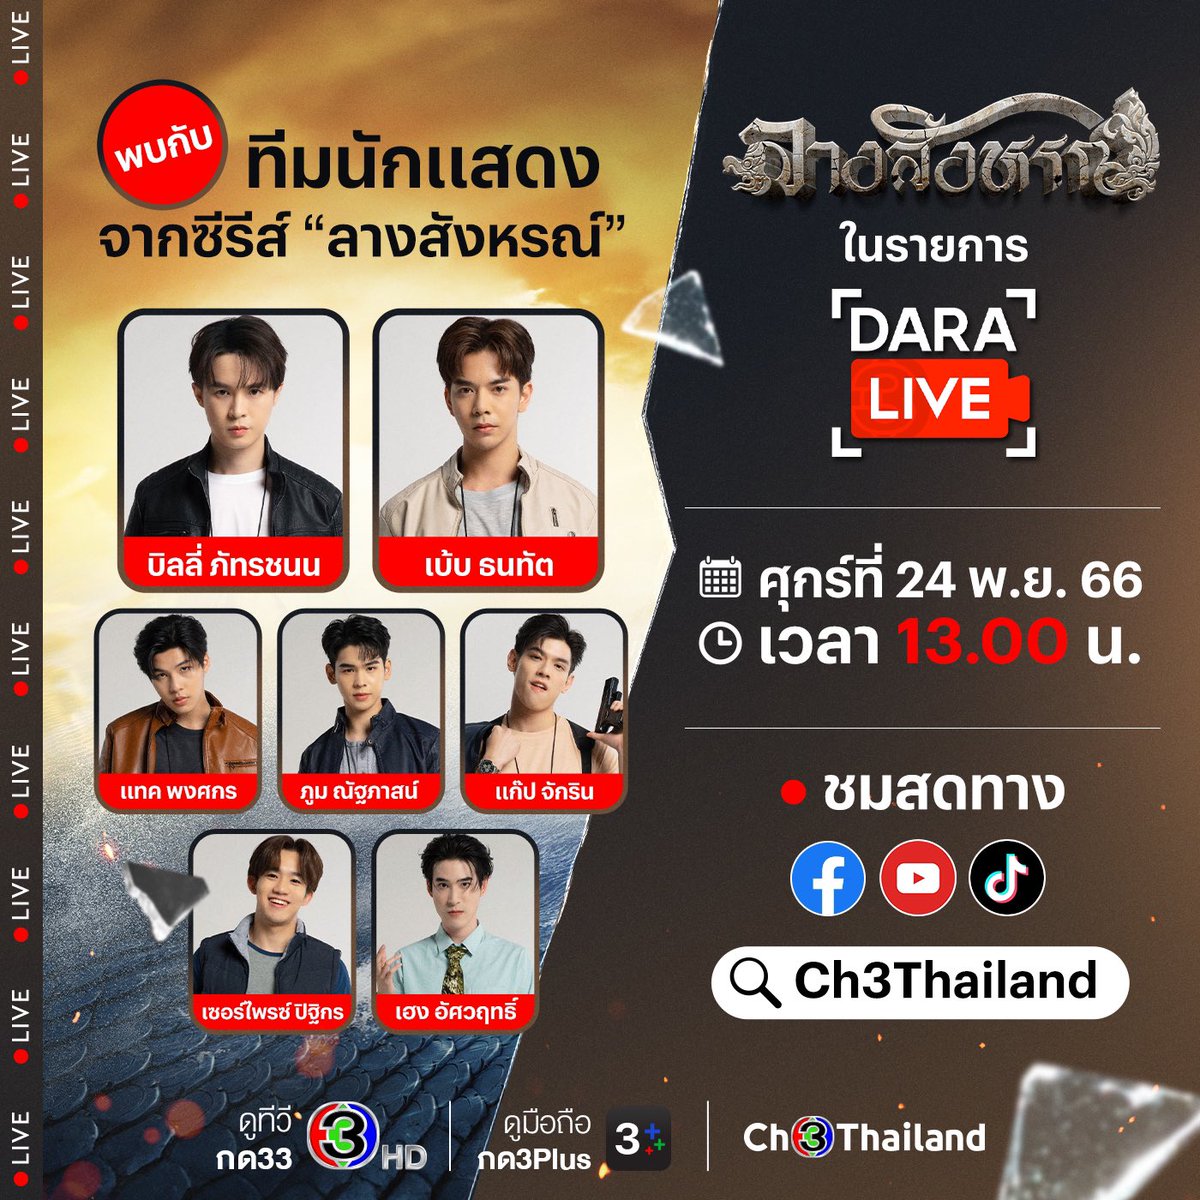 📍 DARALIVE
⏰ 13.00

Facebook facebook.com/Ch3Thailand
Youtube youtube.com/@Ch3Thailand
TikTok vt.tiktok.com/ZSNuQhgSo/

THE SIGN x CH3
#พรุ่งนี้มีลางสังหรณ์